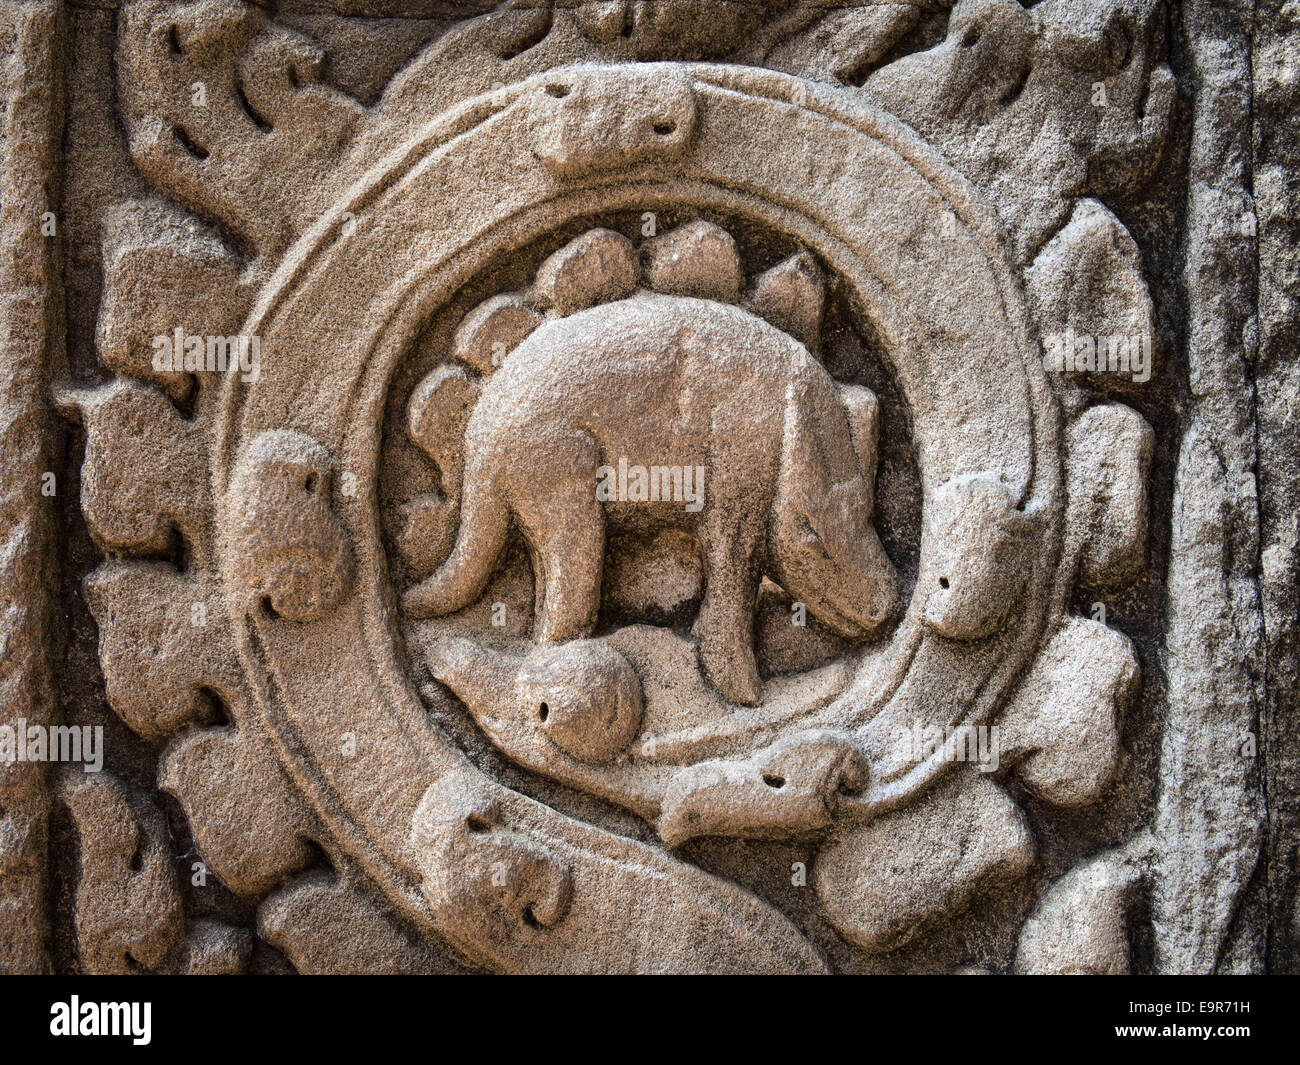 Mysterious bas relief carving depicting a dinosaur at the ancient Ta Prohm temple at Angkor, Siem Reap, Cambodia. Stock Photo